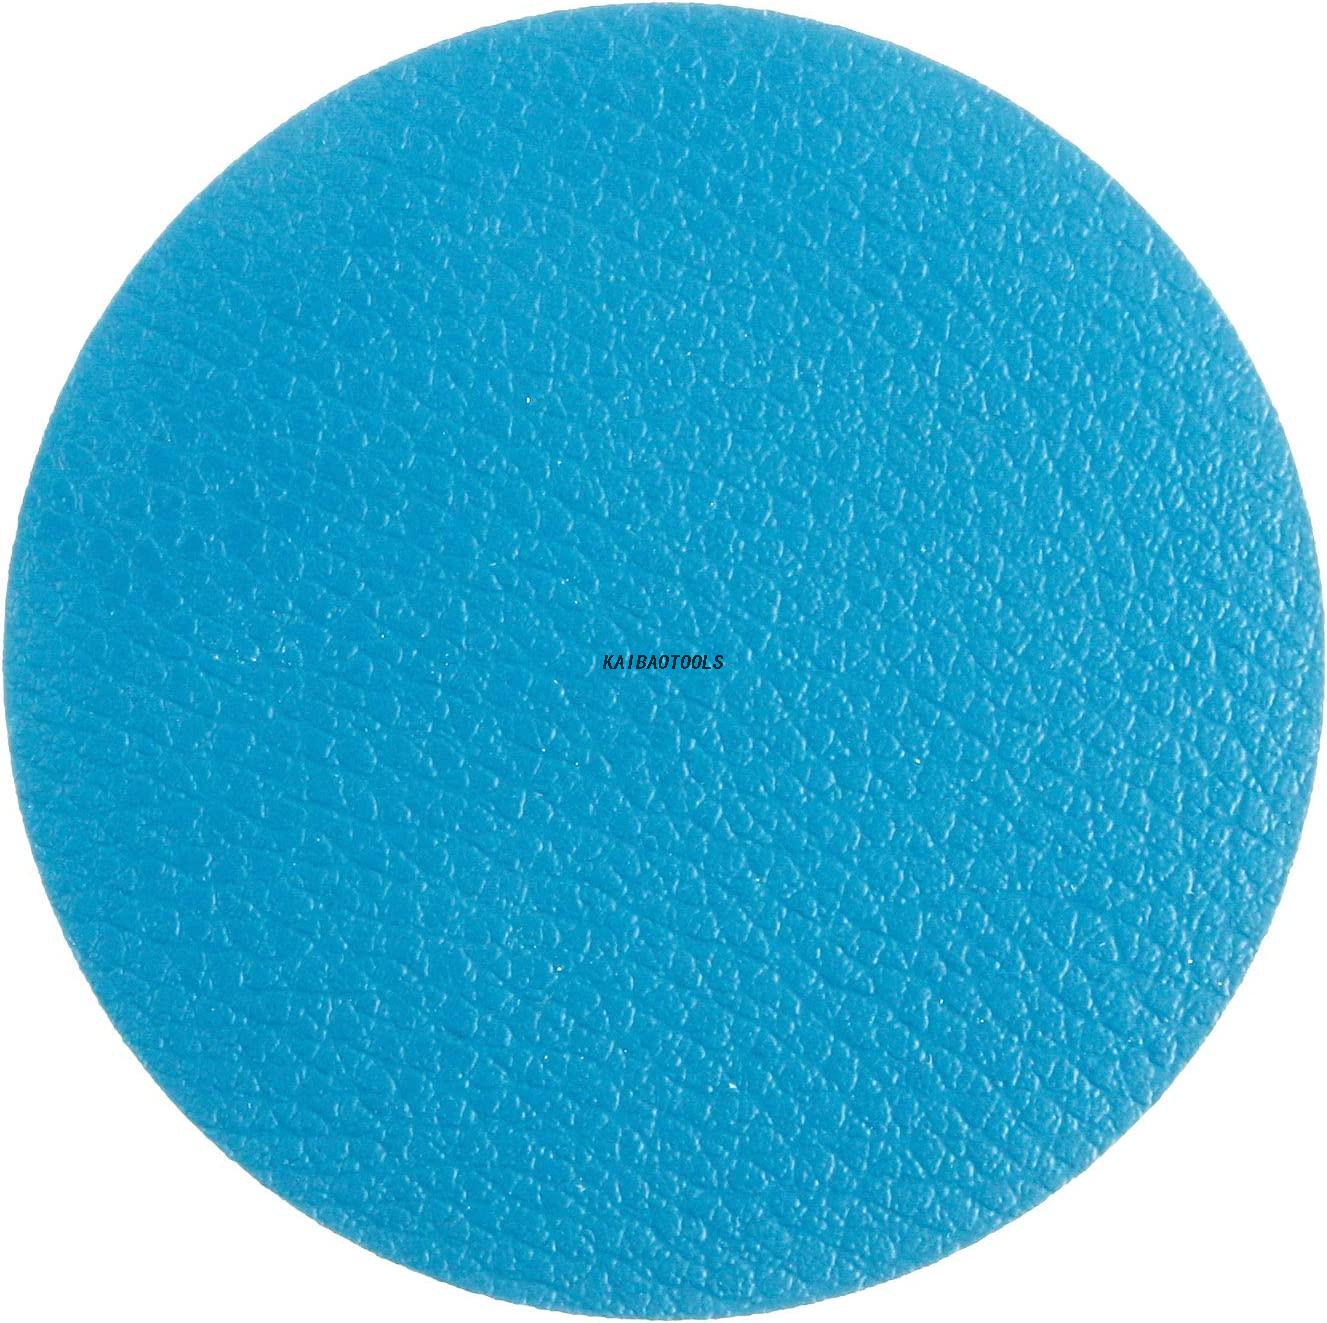  5 inch 125mm PSA Sanding Pads and Backing Pad for Dual Action Air Sander 